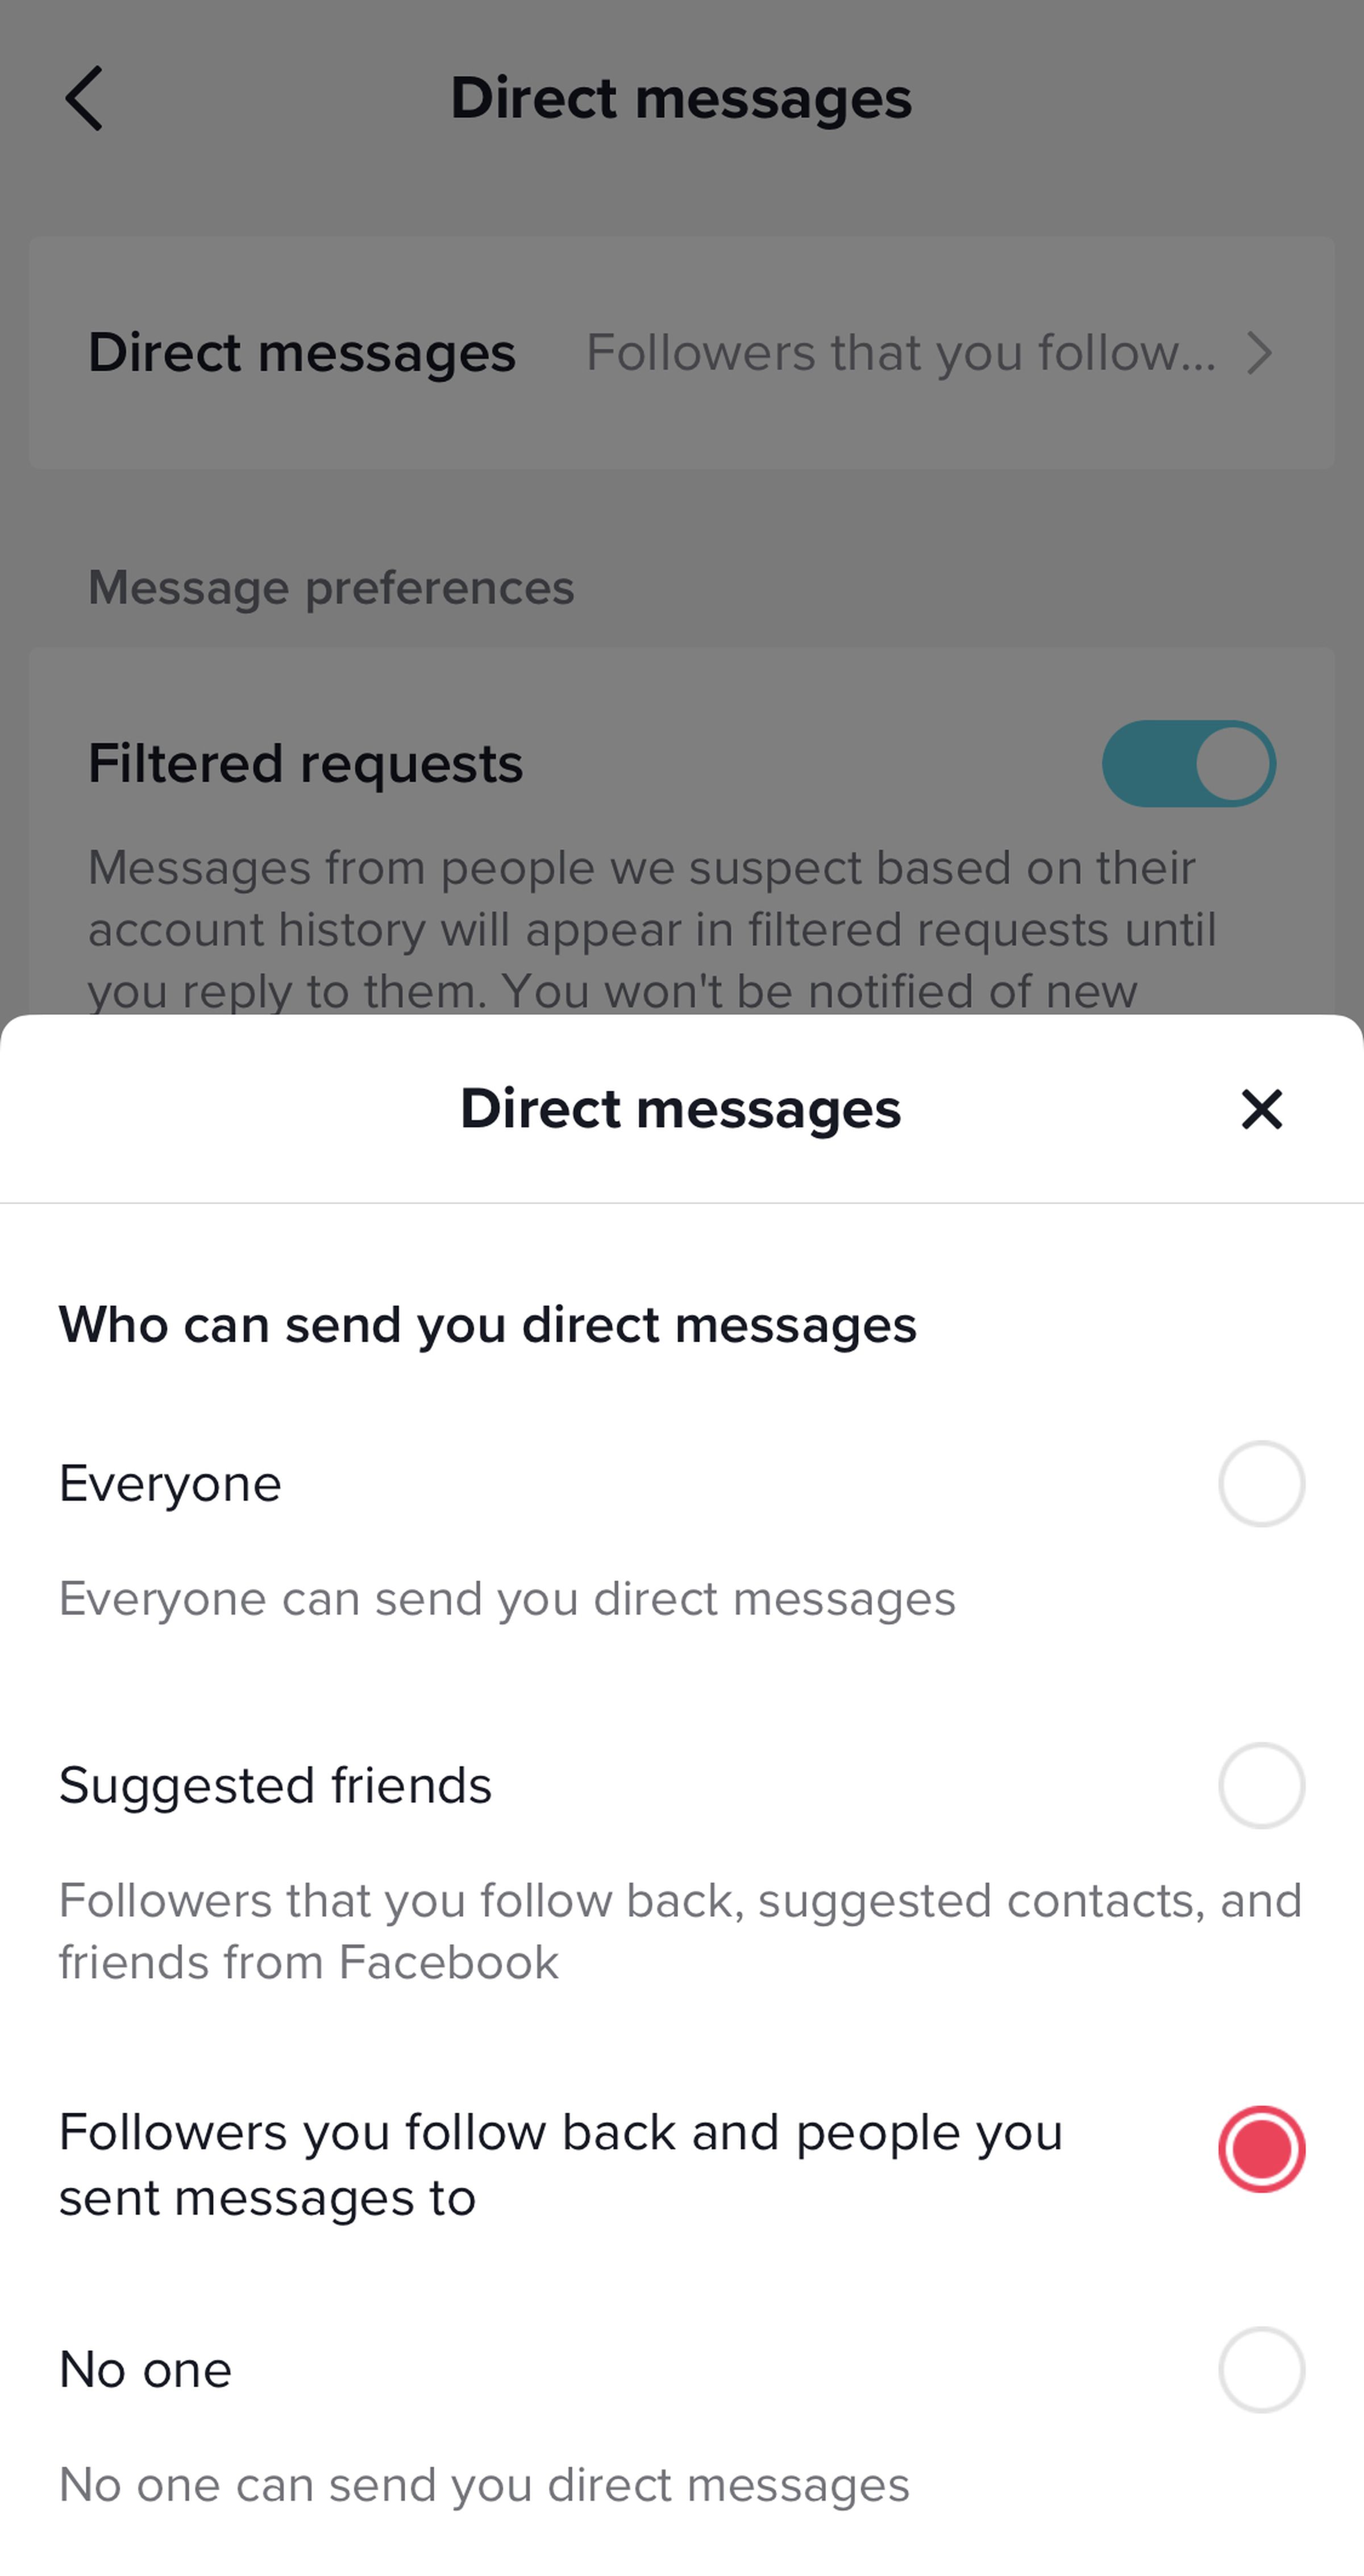 Screenshot of TikTok’s direct messages privacy options page.